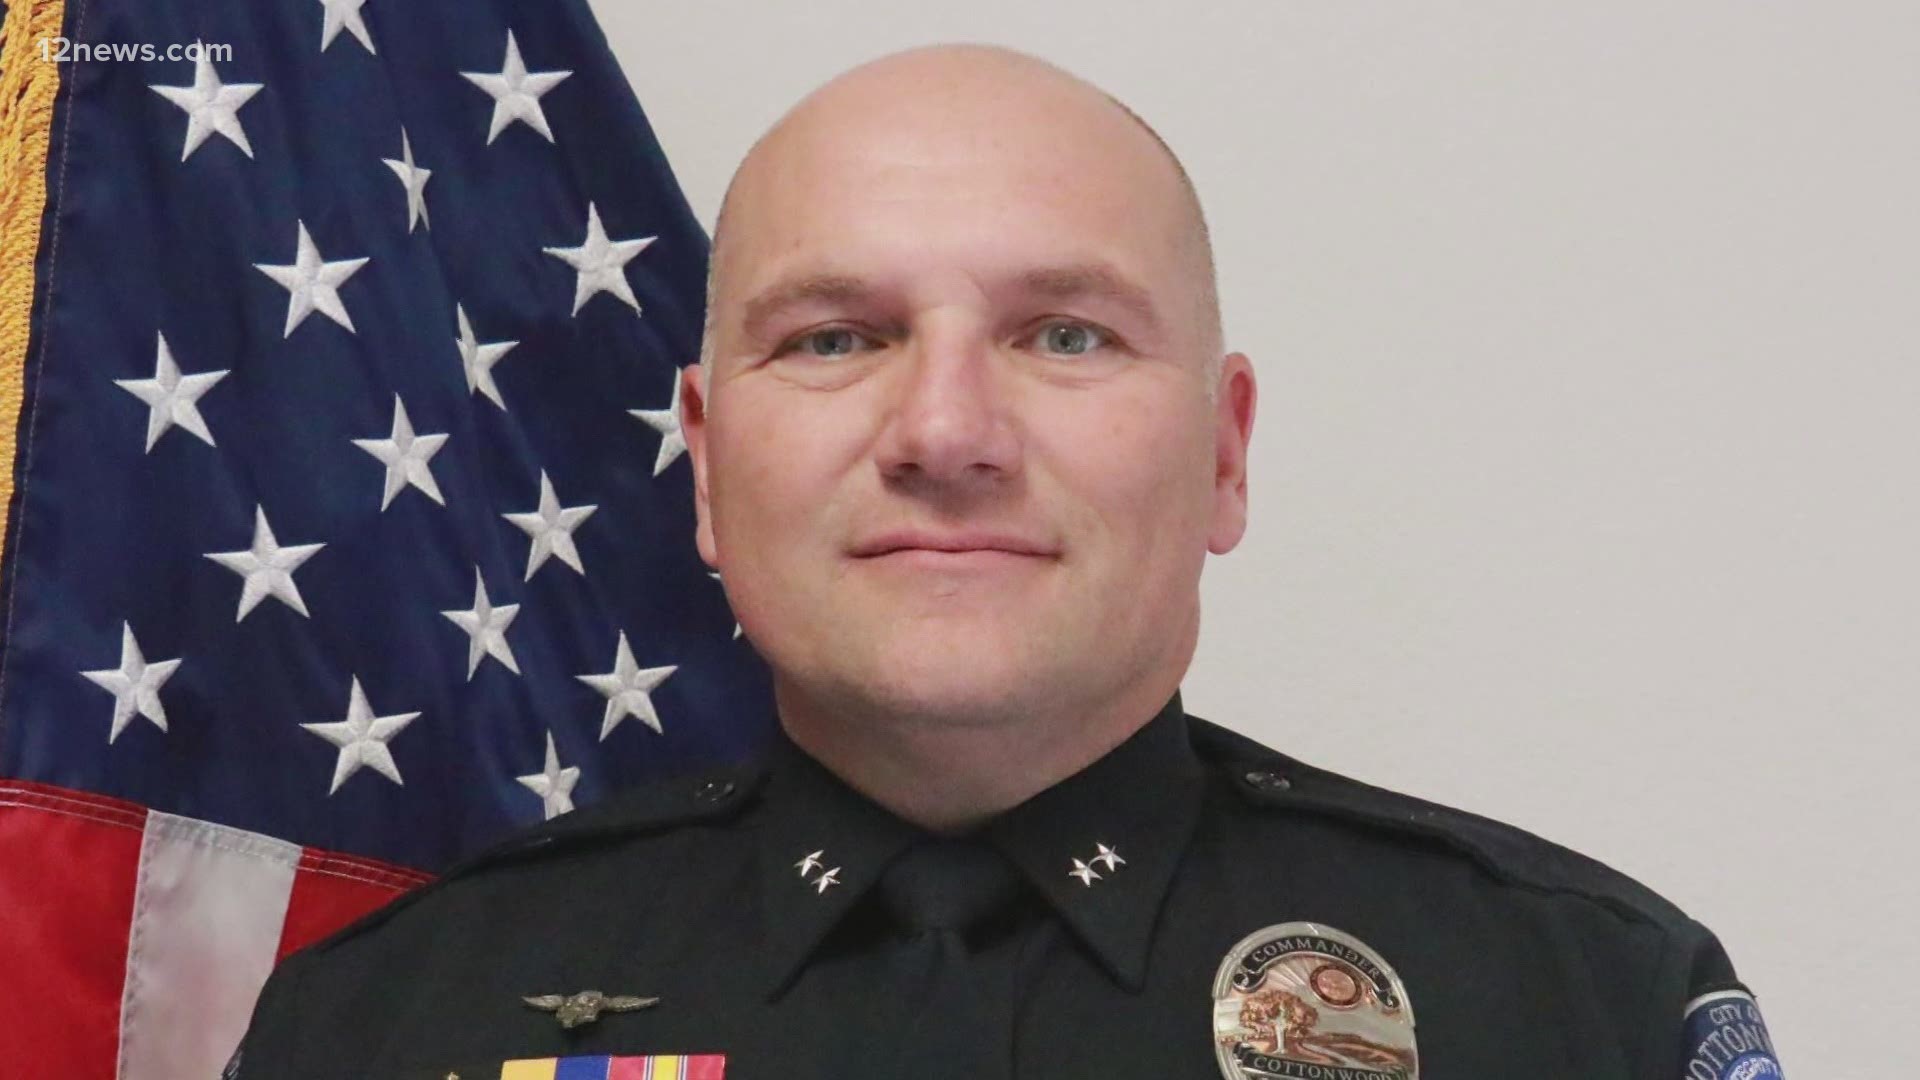 A funeral service was held today for a Cottonwood police officer killed in a traffic accident. Commander Jody Makuch was laid to rest on Friday.